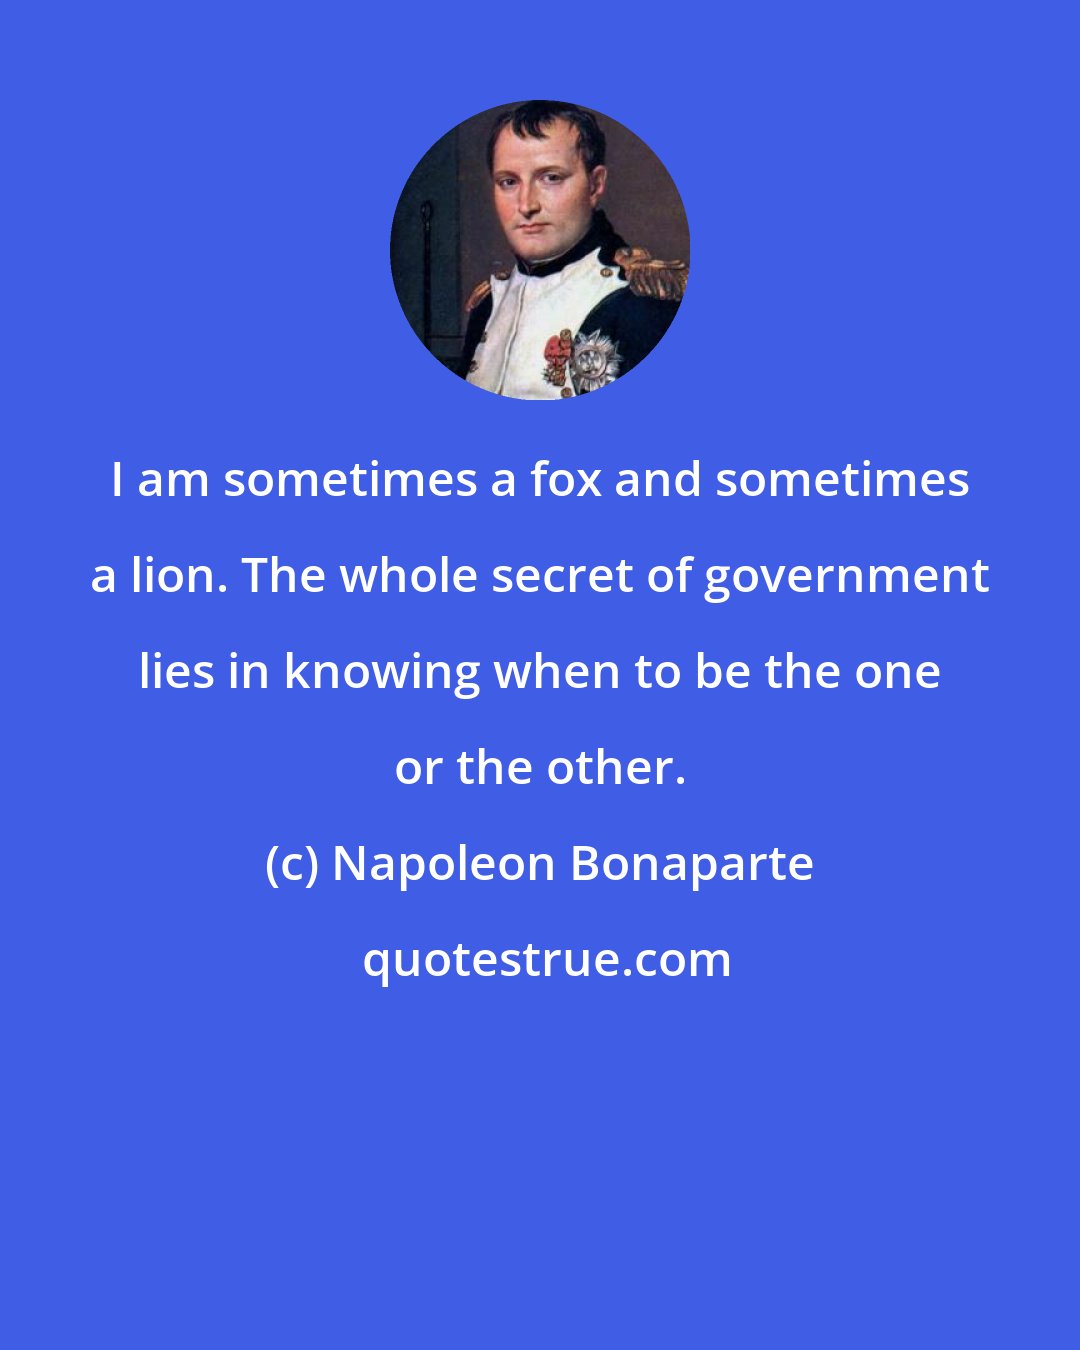 Napoleon Bonaparte: I am sometimes a fox and sometimes a lion. The whole secret of government lies in knowing when to be the one or the other.